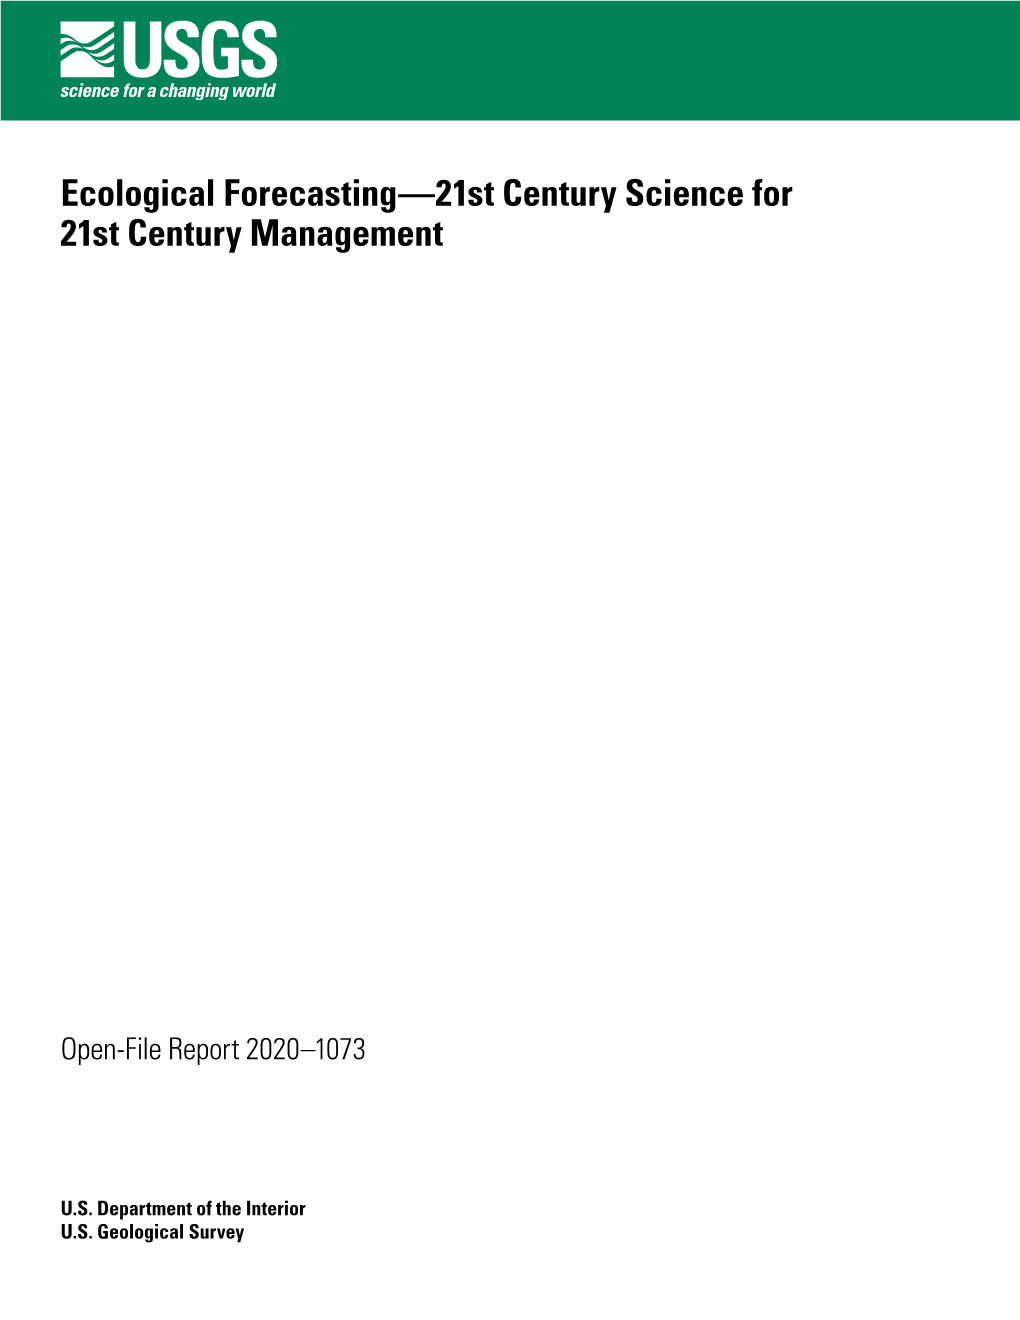 Ecological Forecasting—21St Century Science for 21St Century Management